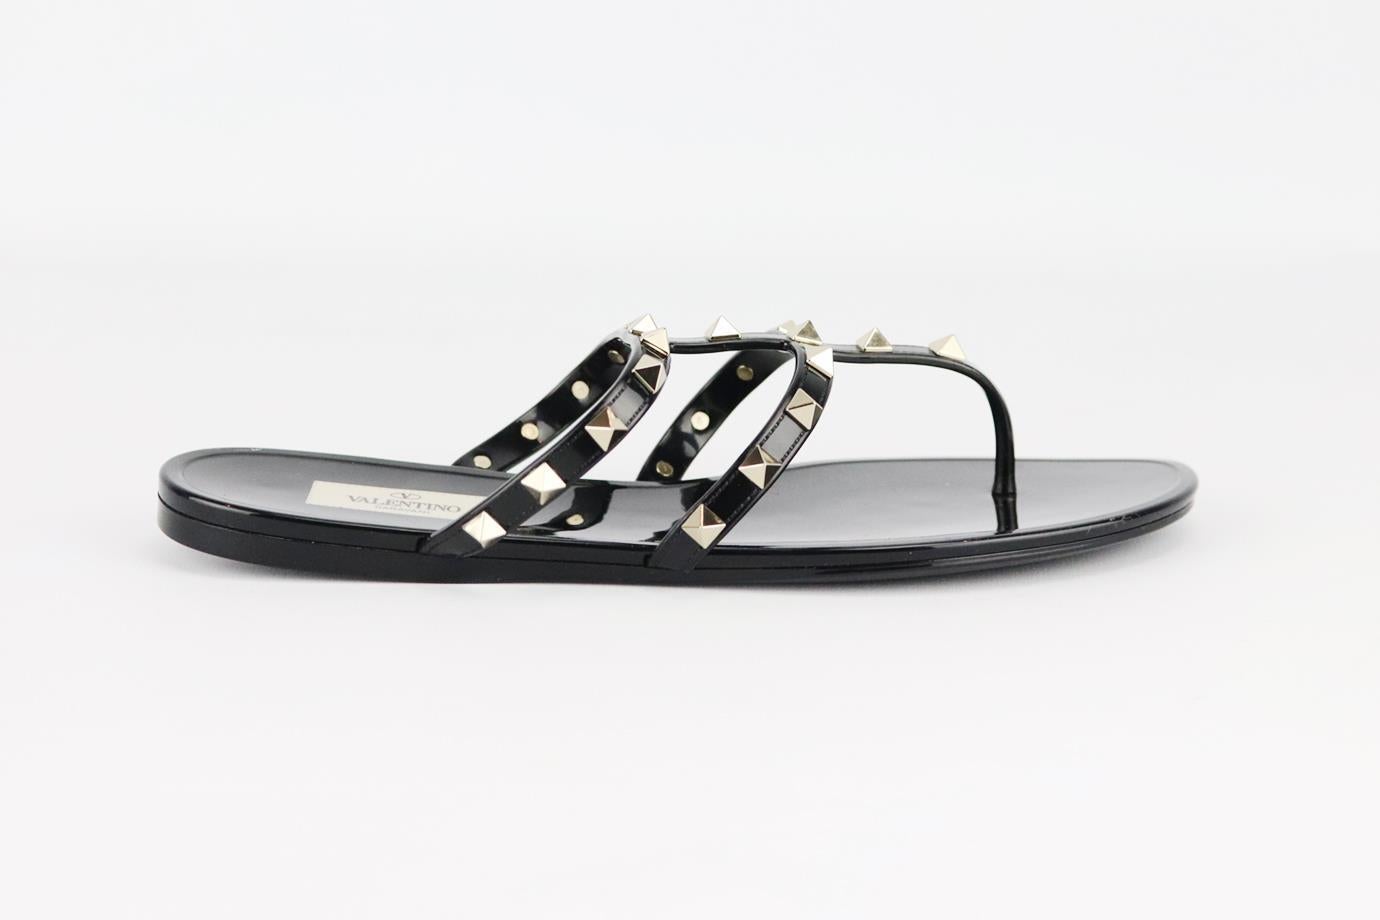 Valentino Garavani Rockstud rubber sandals. Black. Slips on. Does not come with box or dustbag. Size: EU 39 (UK 6, US 9). Insole: 10 in. Heel: 0.5 in
